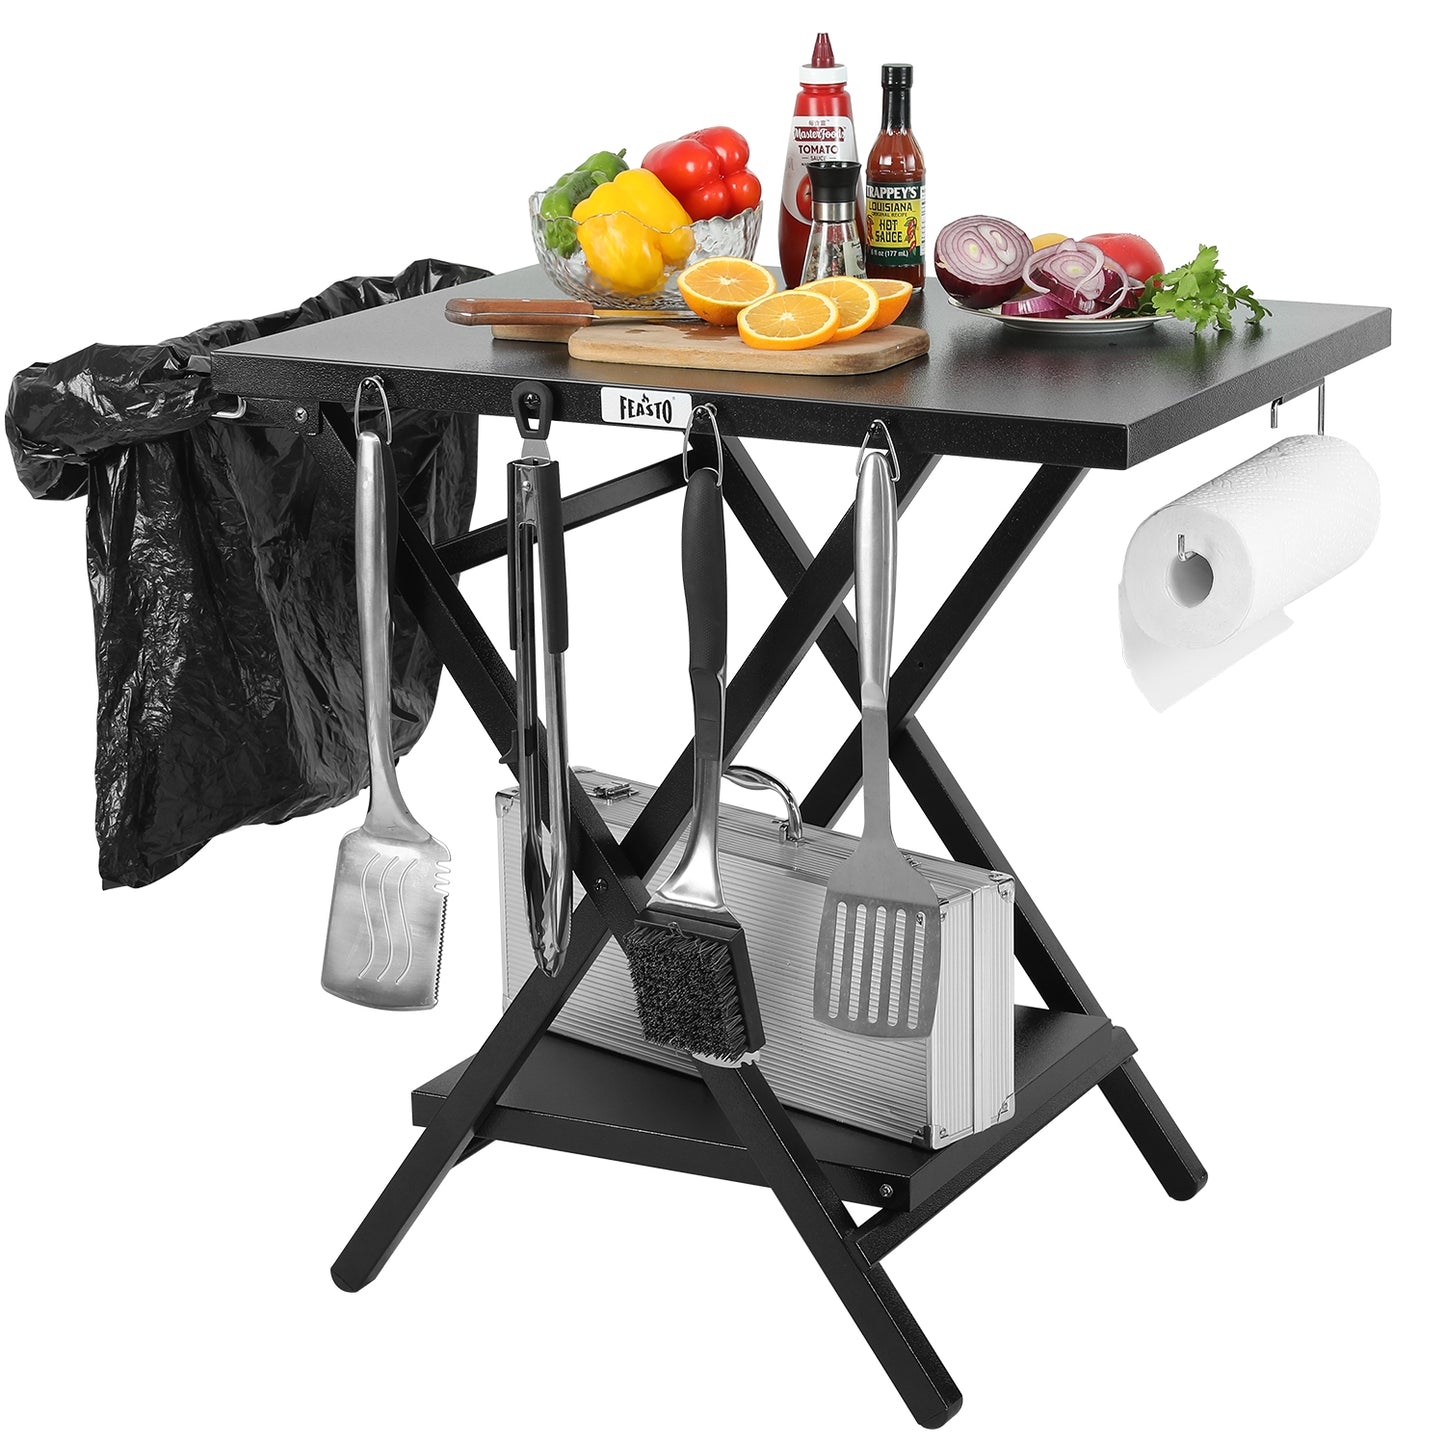 Feasto Large Folding Table Foldable Grill Stand and Pizza Oven Stand Portable Outdoor Food Prep Table Friendly to Storage Ideal for Camp or RV Black